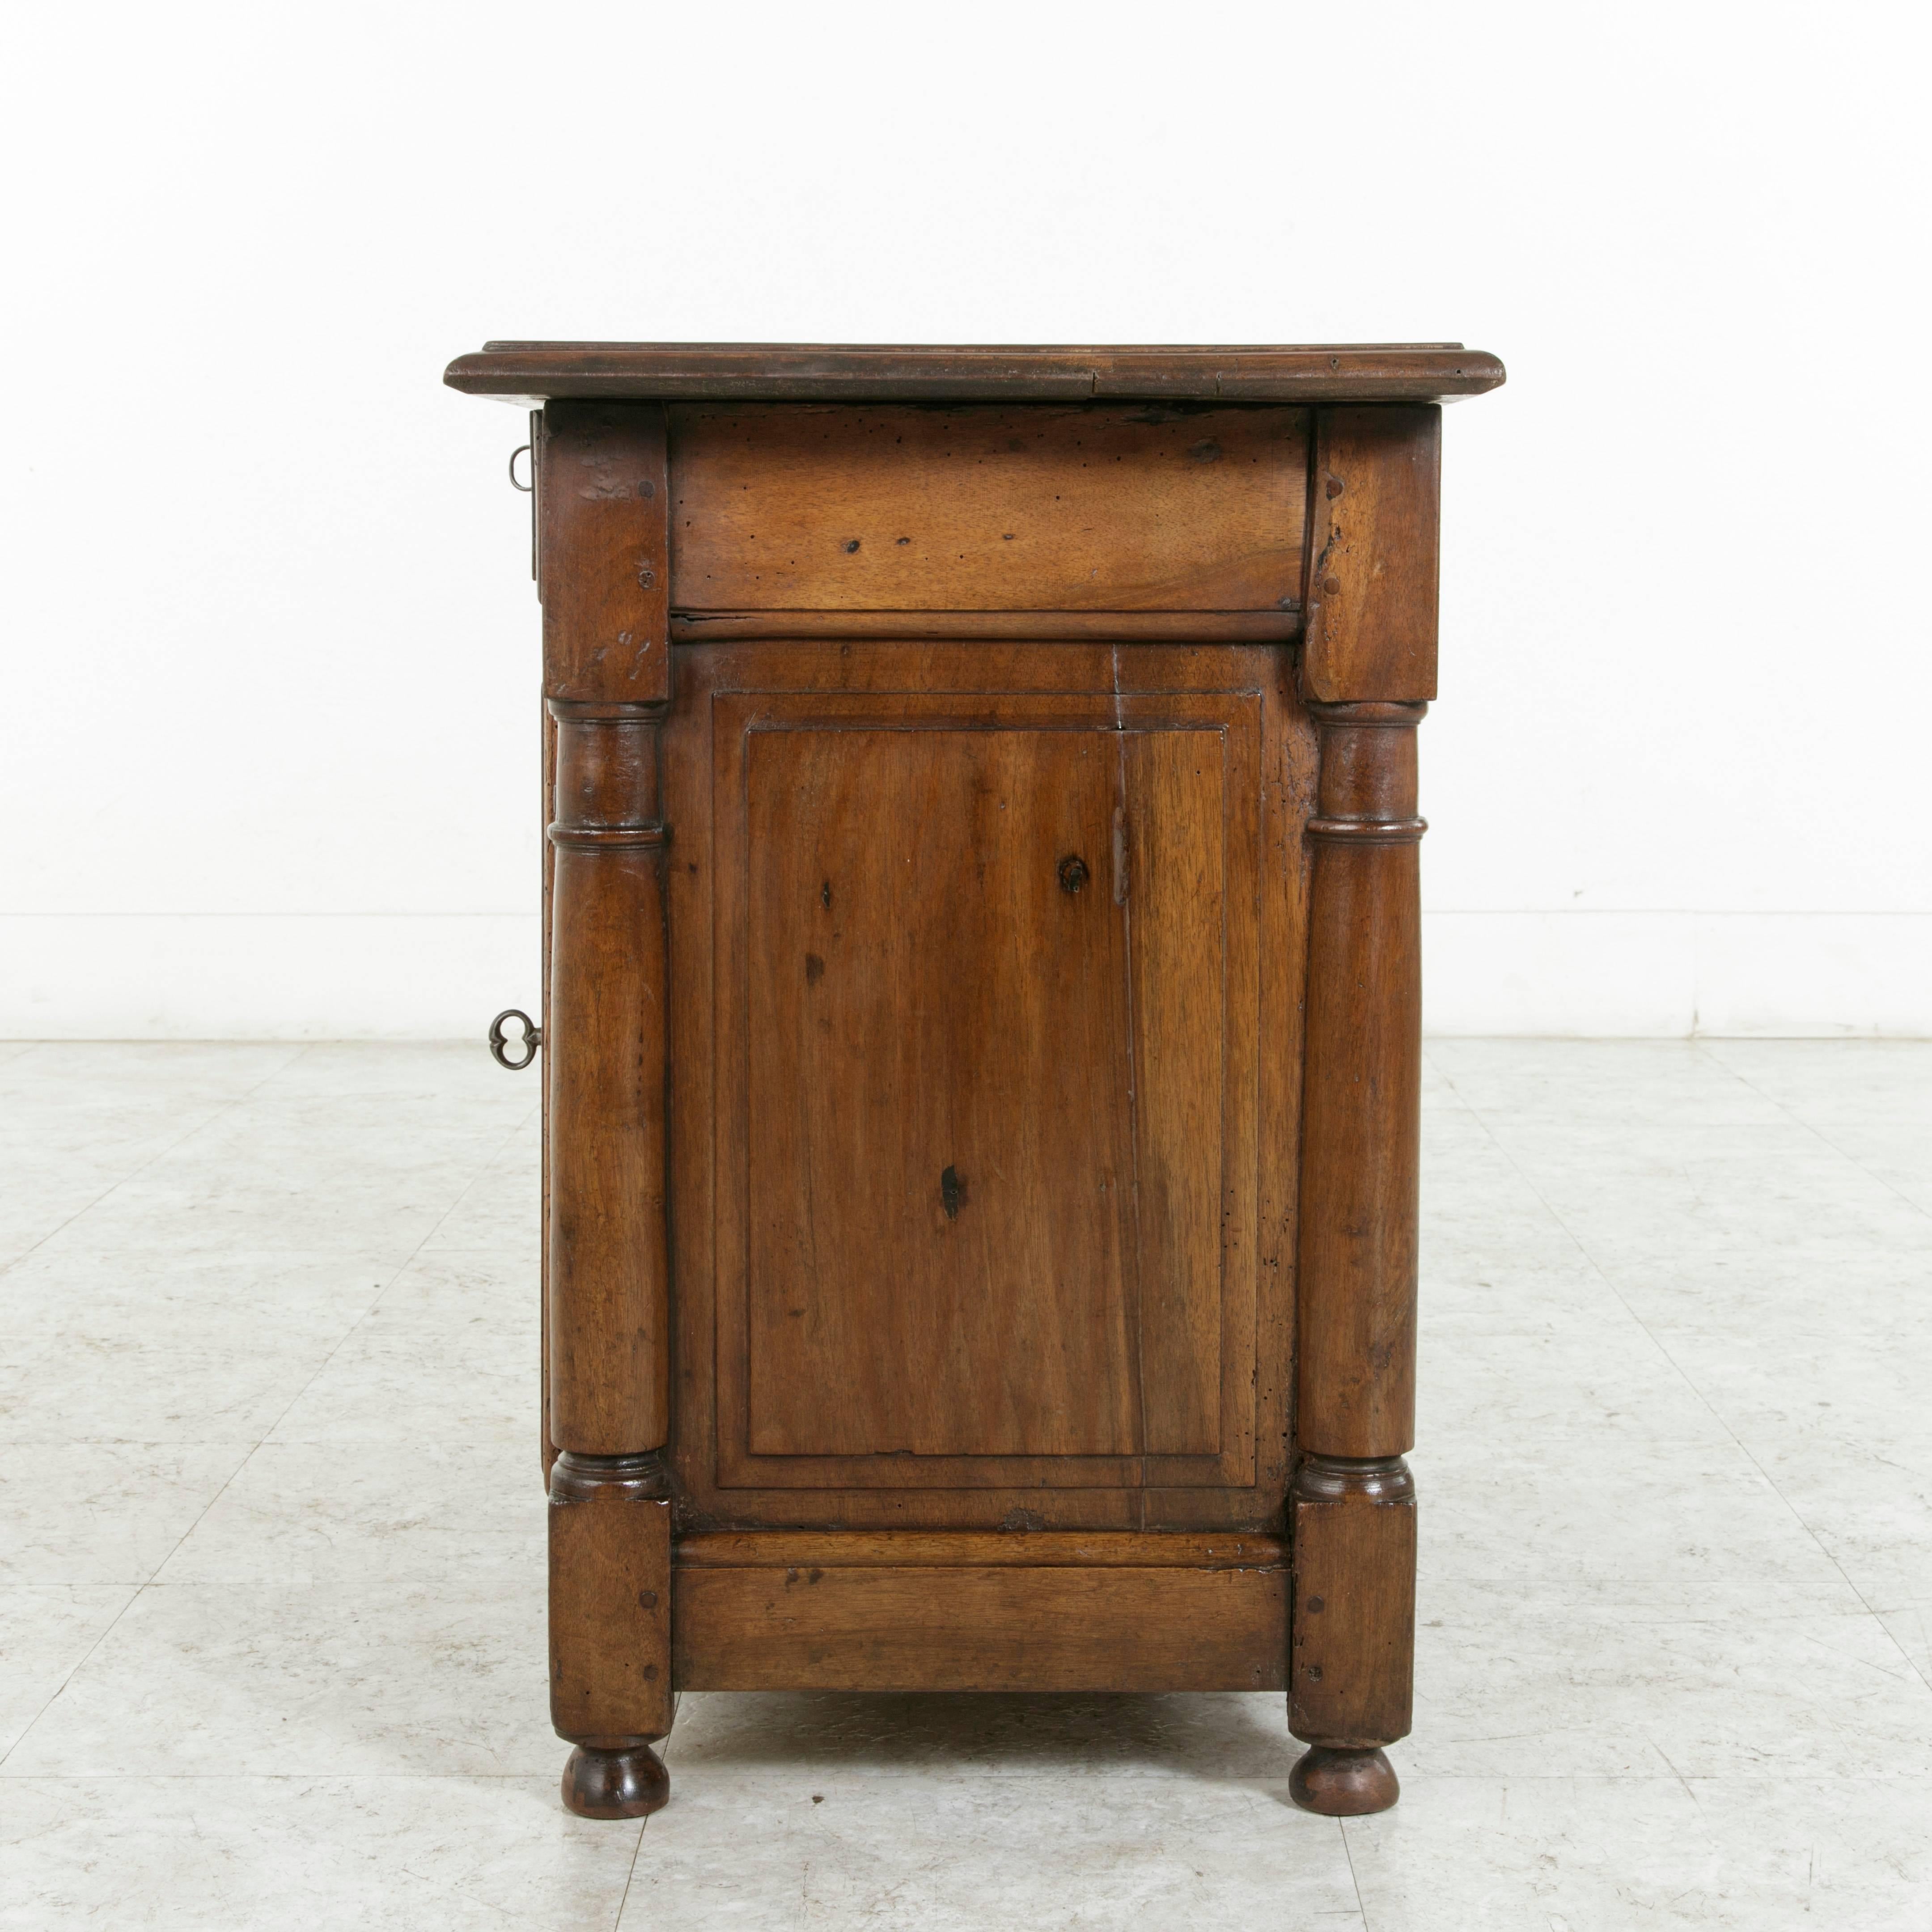 Small-Scale Late 18th Century French Walnut Cabinet or Nightstand 1